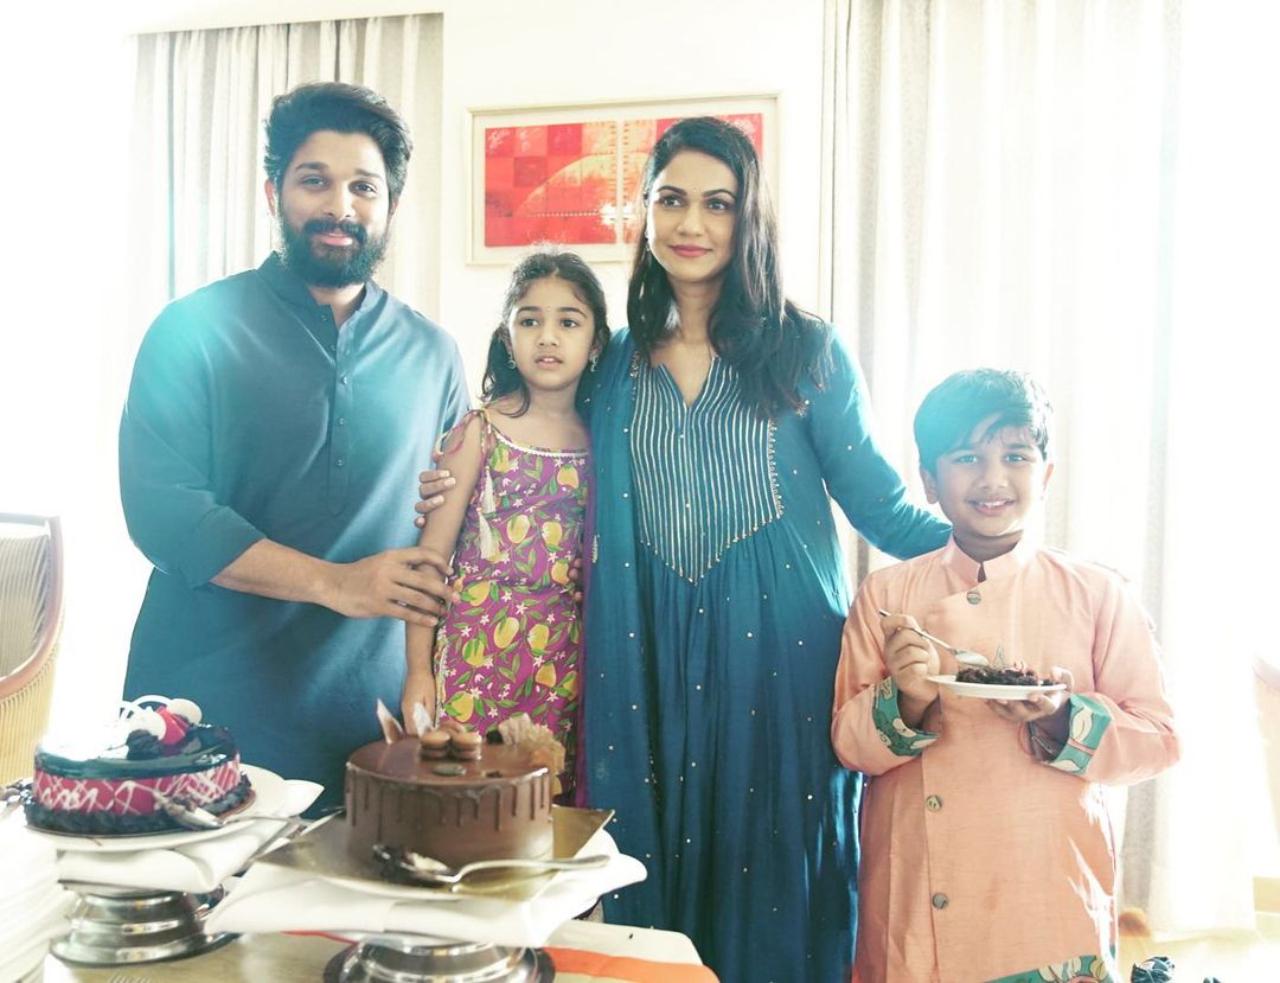 Telugu film superstar Allu Arjun often posts pictures and videos featuring his kids on his Instagram handle. The actor married Allu Sneha Reddy on March 6, 2011. They have two children—a son, Ayaan, and a daughter, Arha. Their daughter Arha recently made her acting debut as a child artist in Samantha Ruth Prabhu's 'Shaakuntalam'